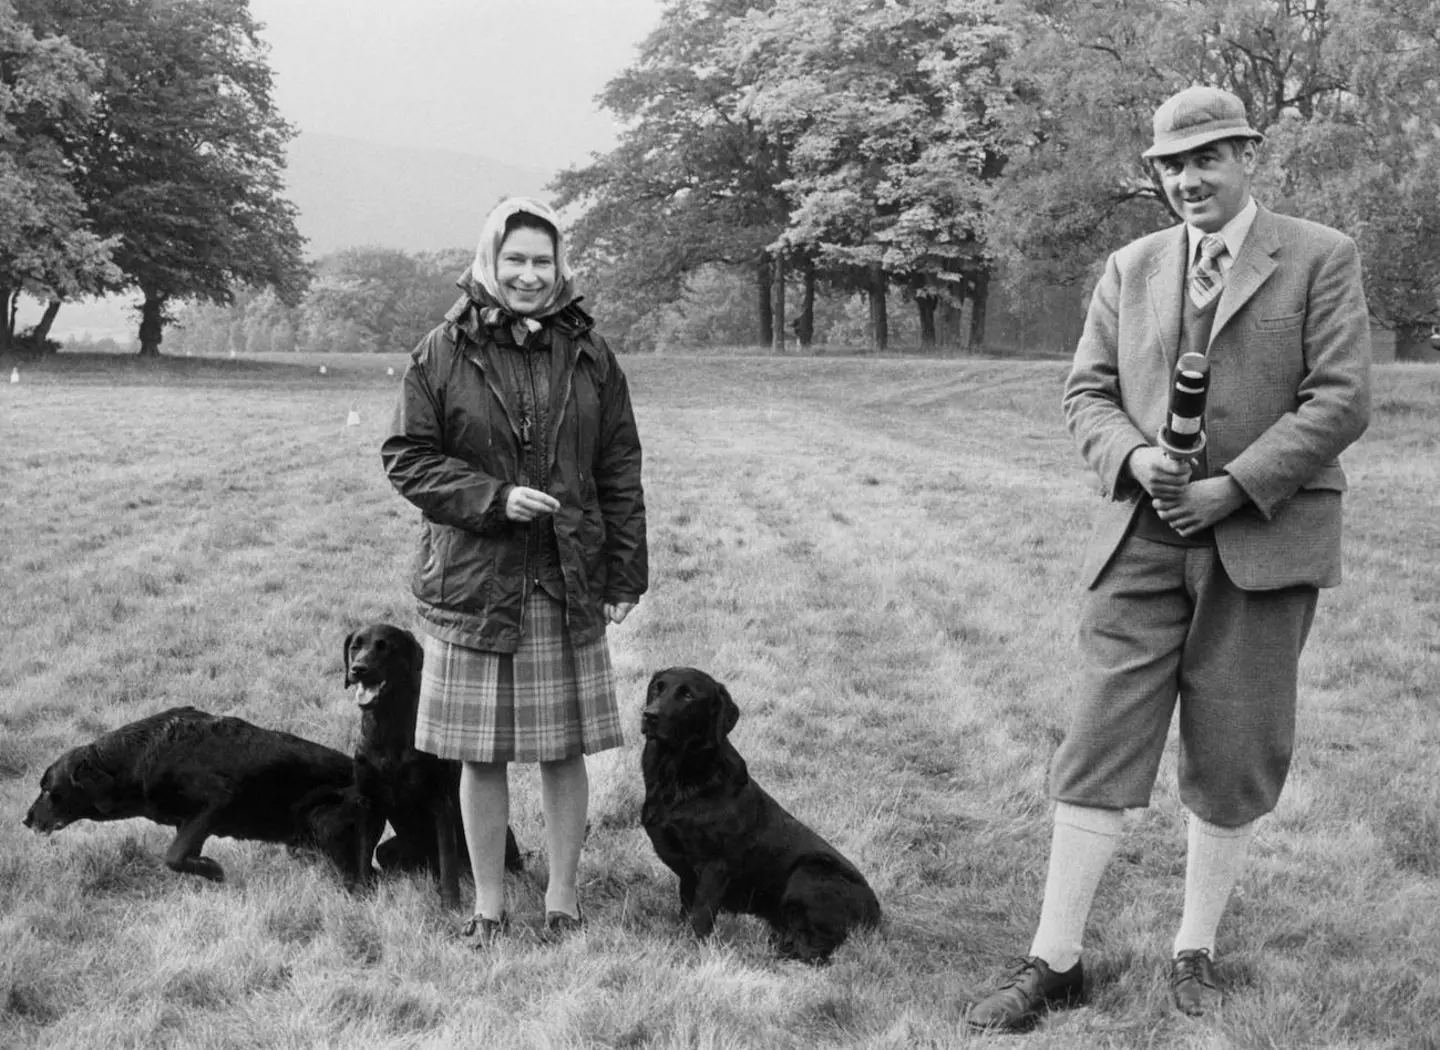 Queen Elizabeth II at Balmoral Castle in Scotland, accompanied by her dog trainer and Game Keeper, Bill Meldrum in 1977.